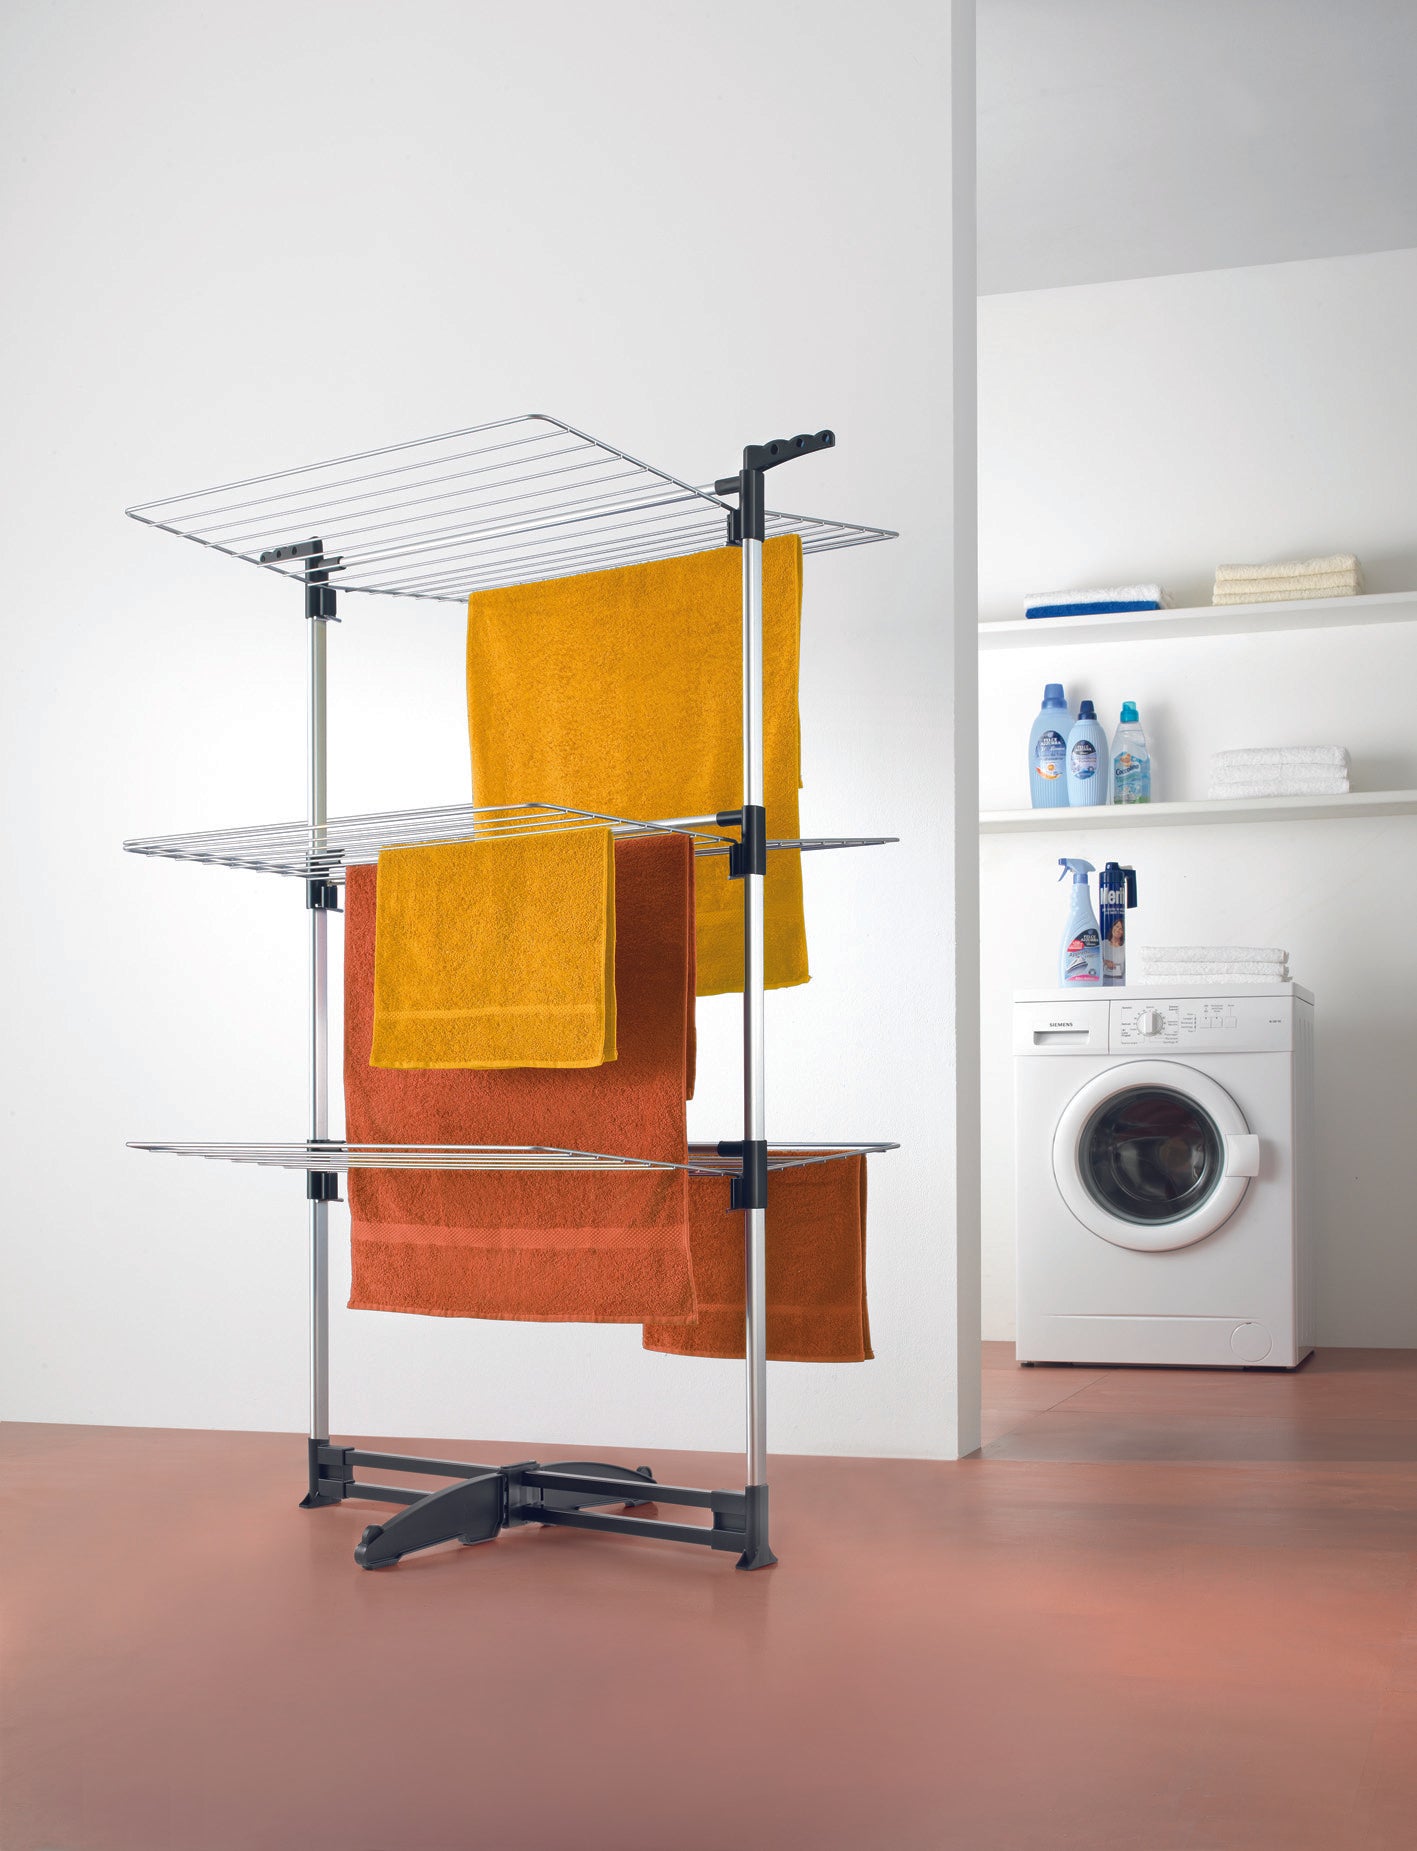 Metaltex Epotherm Coating Grids Aluminium Frame Tower Laundry Dryer With Easy Access, 78X68X137 Cm